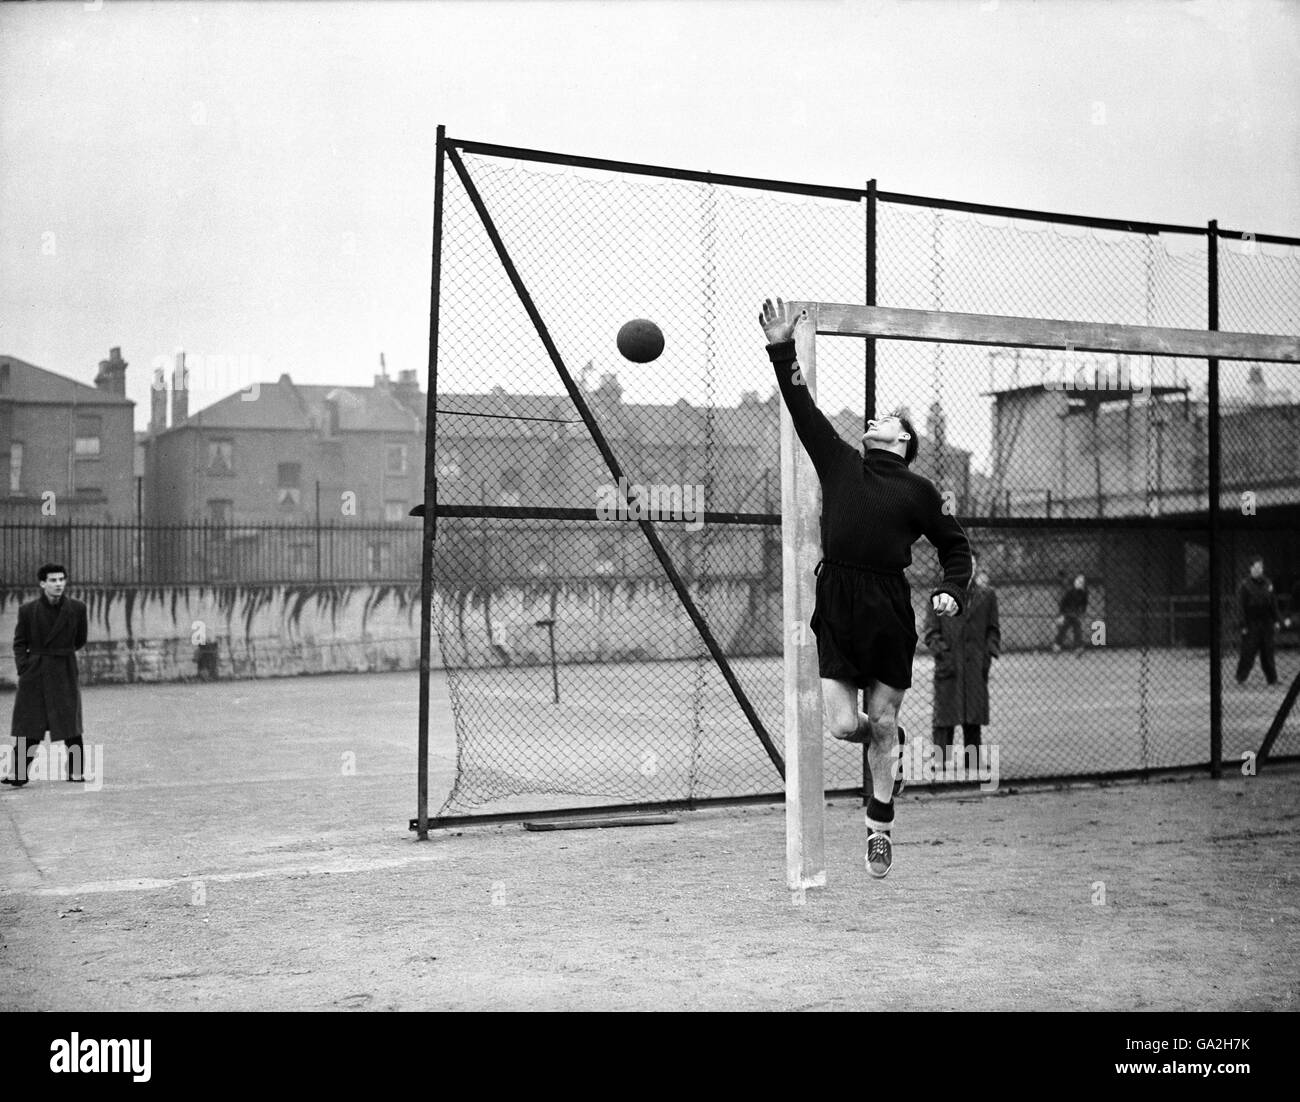 Soccer - Football League Division One - Arsenal Training Stock Photo